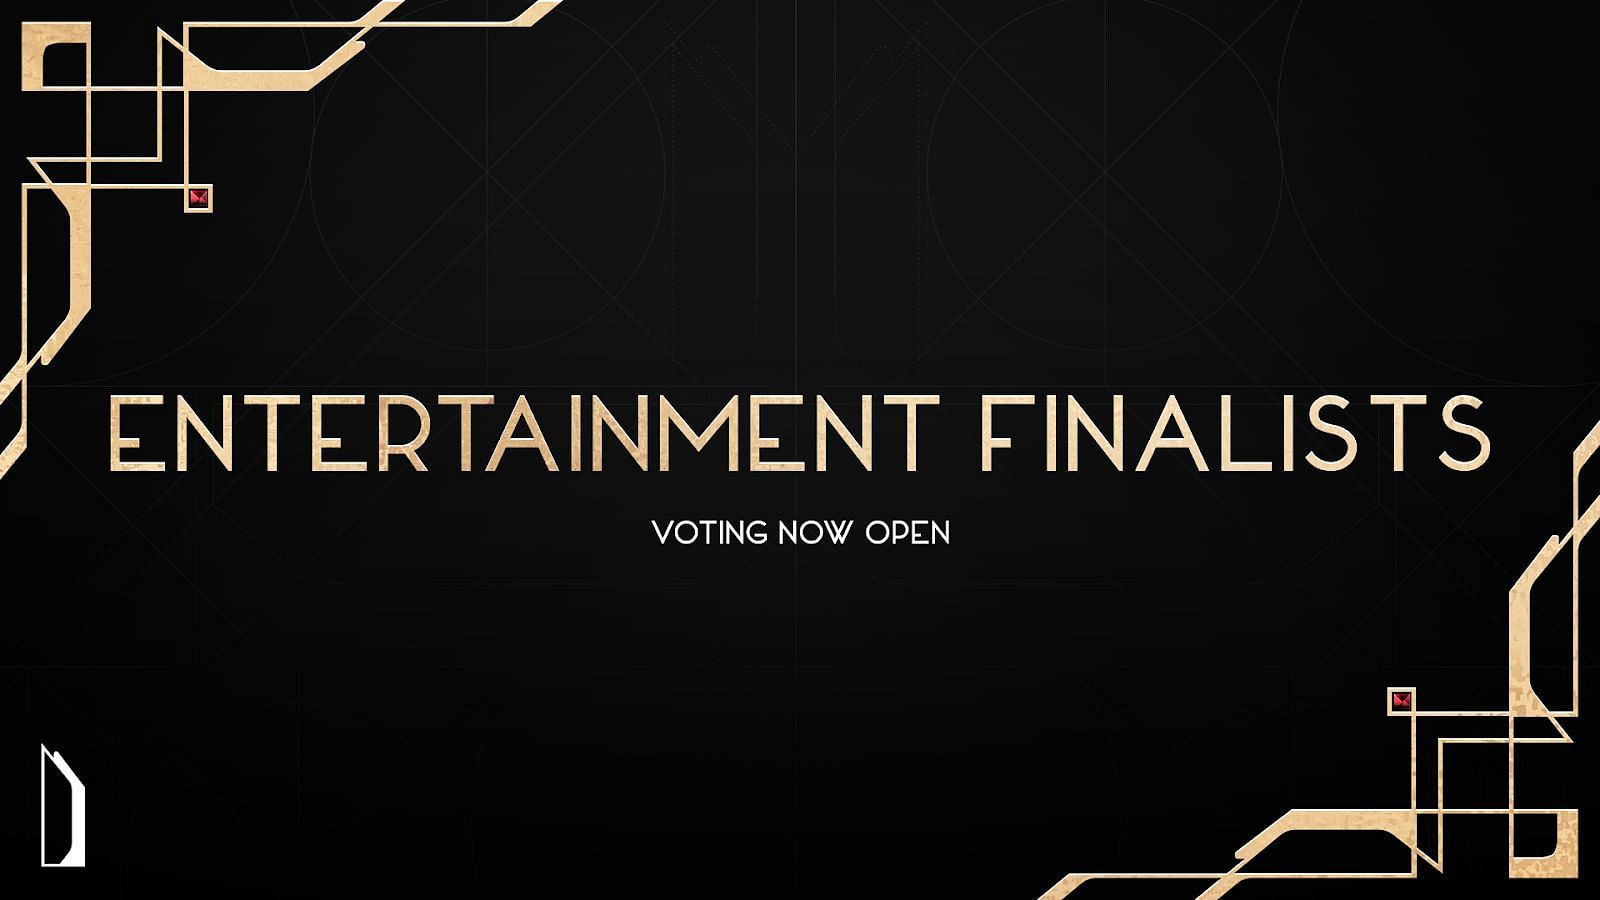 Voting is open for Entertainment Awards (Image via Esports Awards)